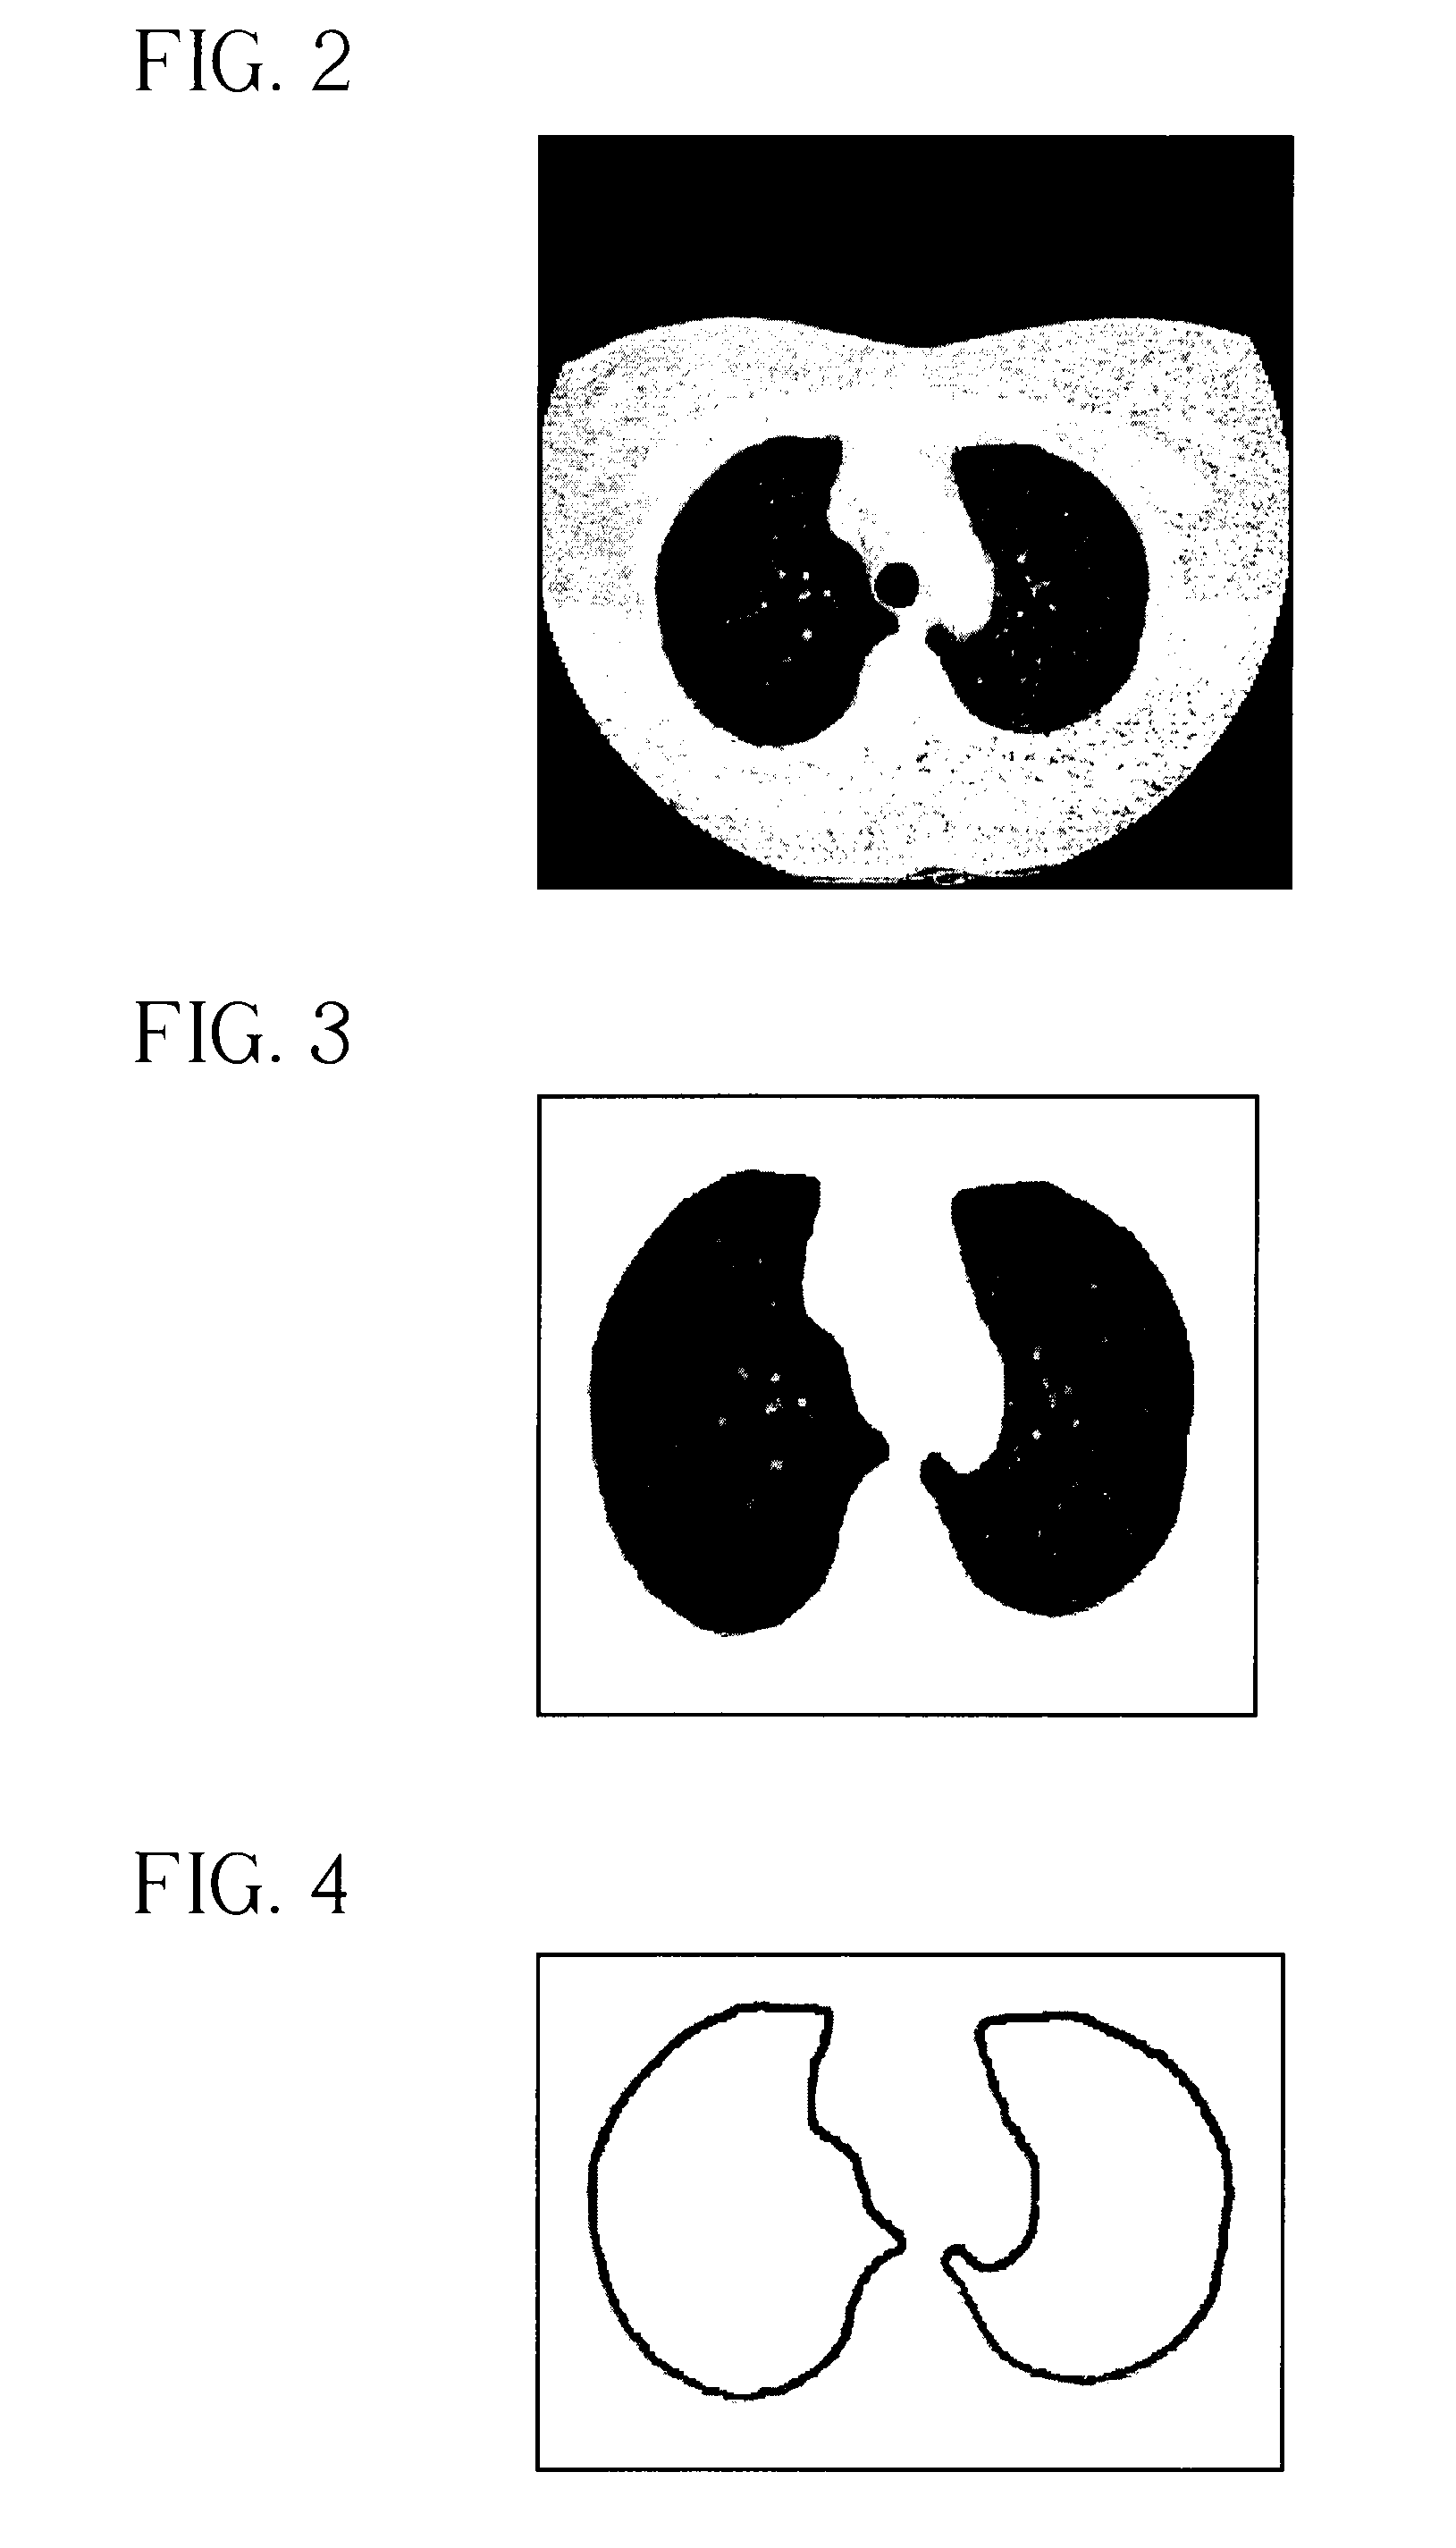 System, Method and Apparatus for Small Pulmonary Nodule Computer Aided Diagnosis from Computed Tomography Scans